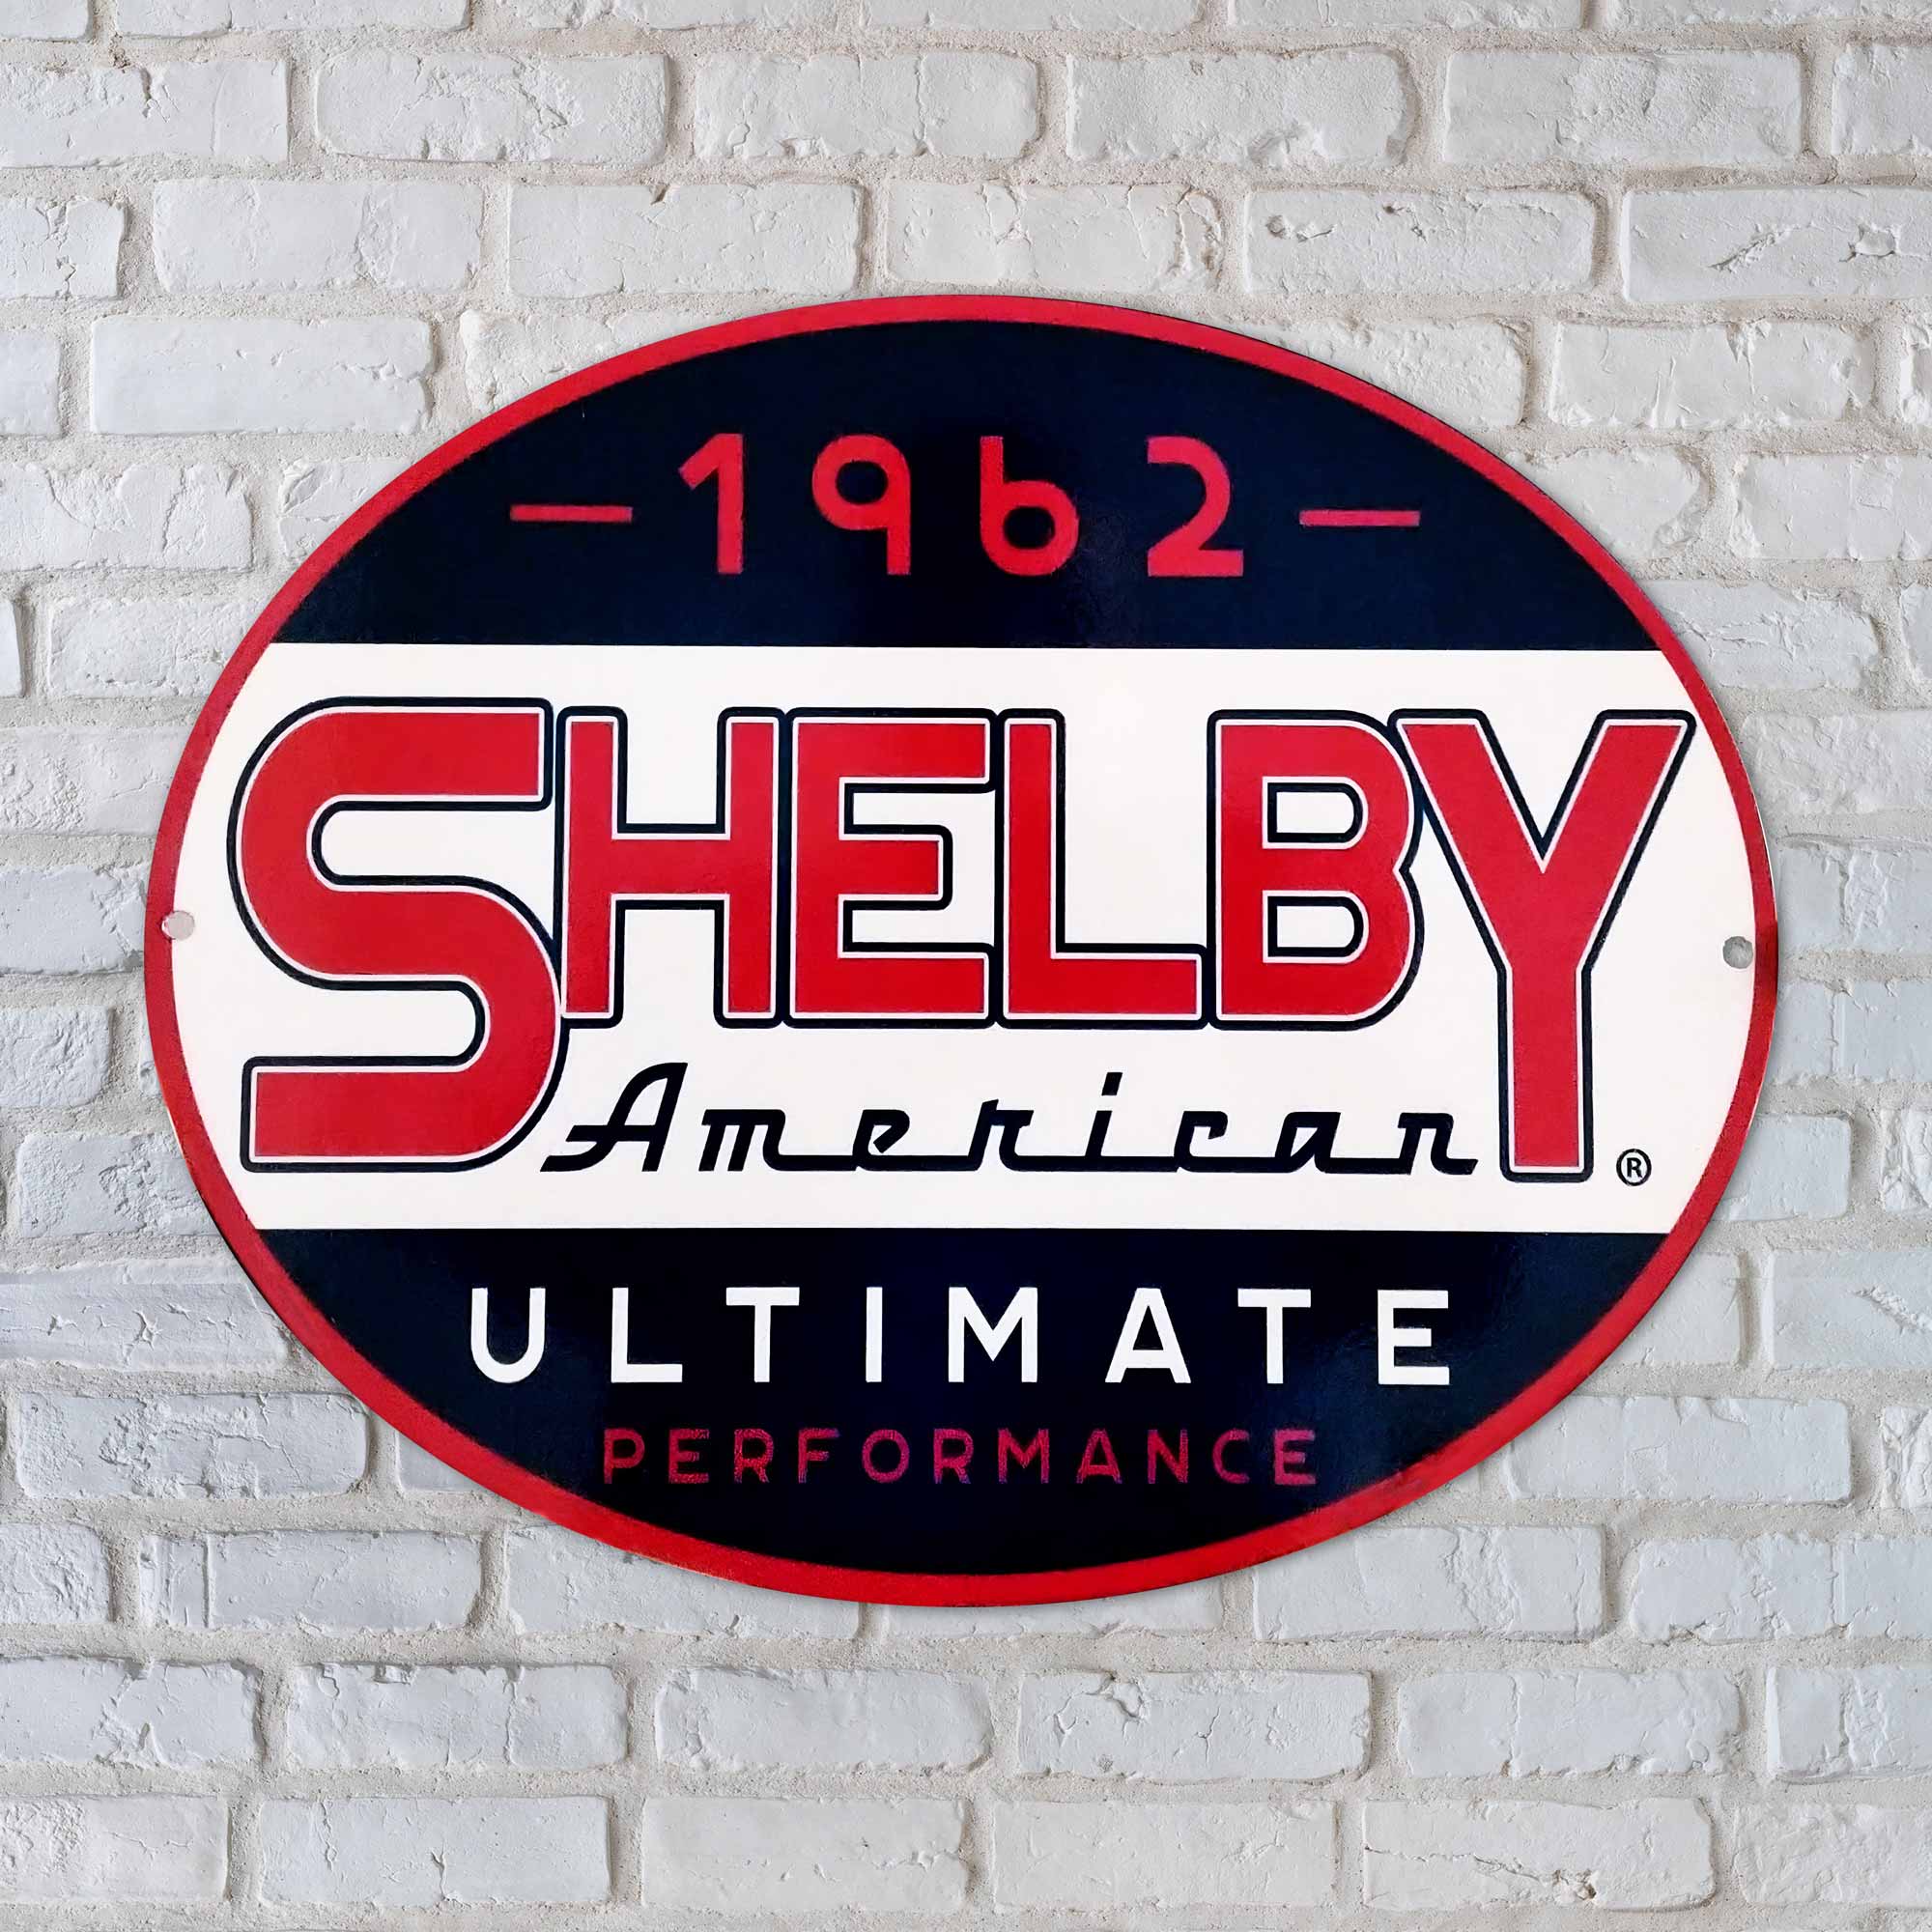 This Vintage Carroll Shelby Branded Sign echoes back to 1962. The era of racing elite!